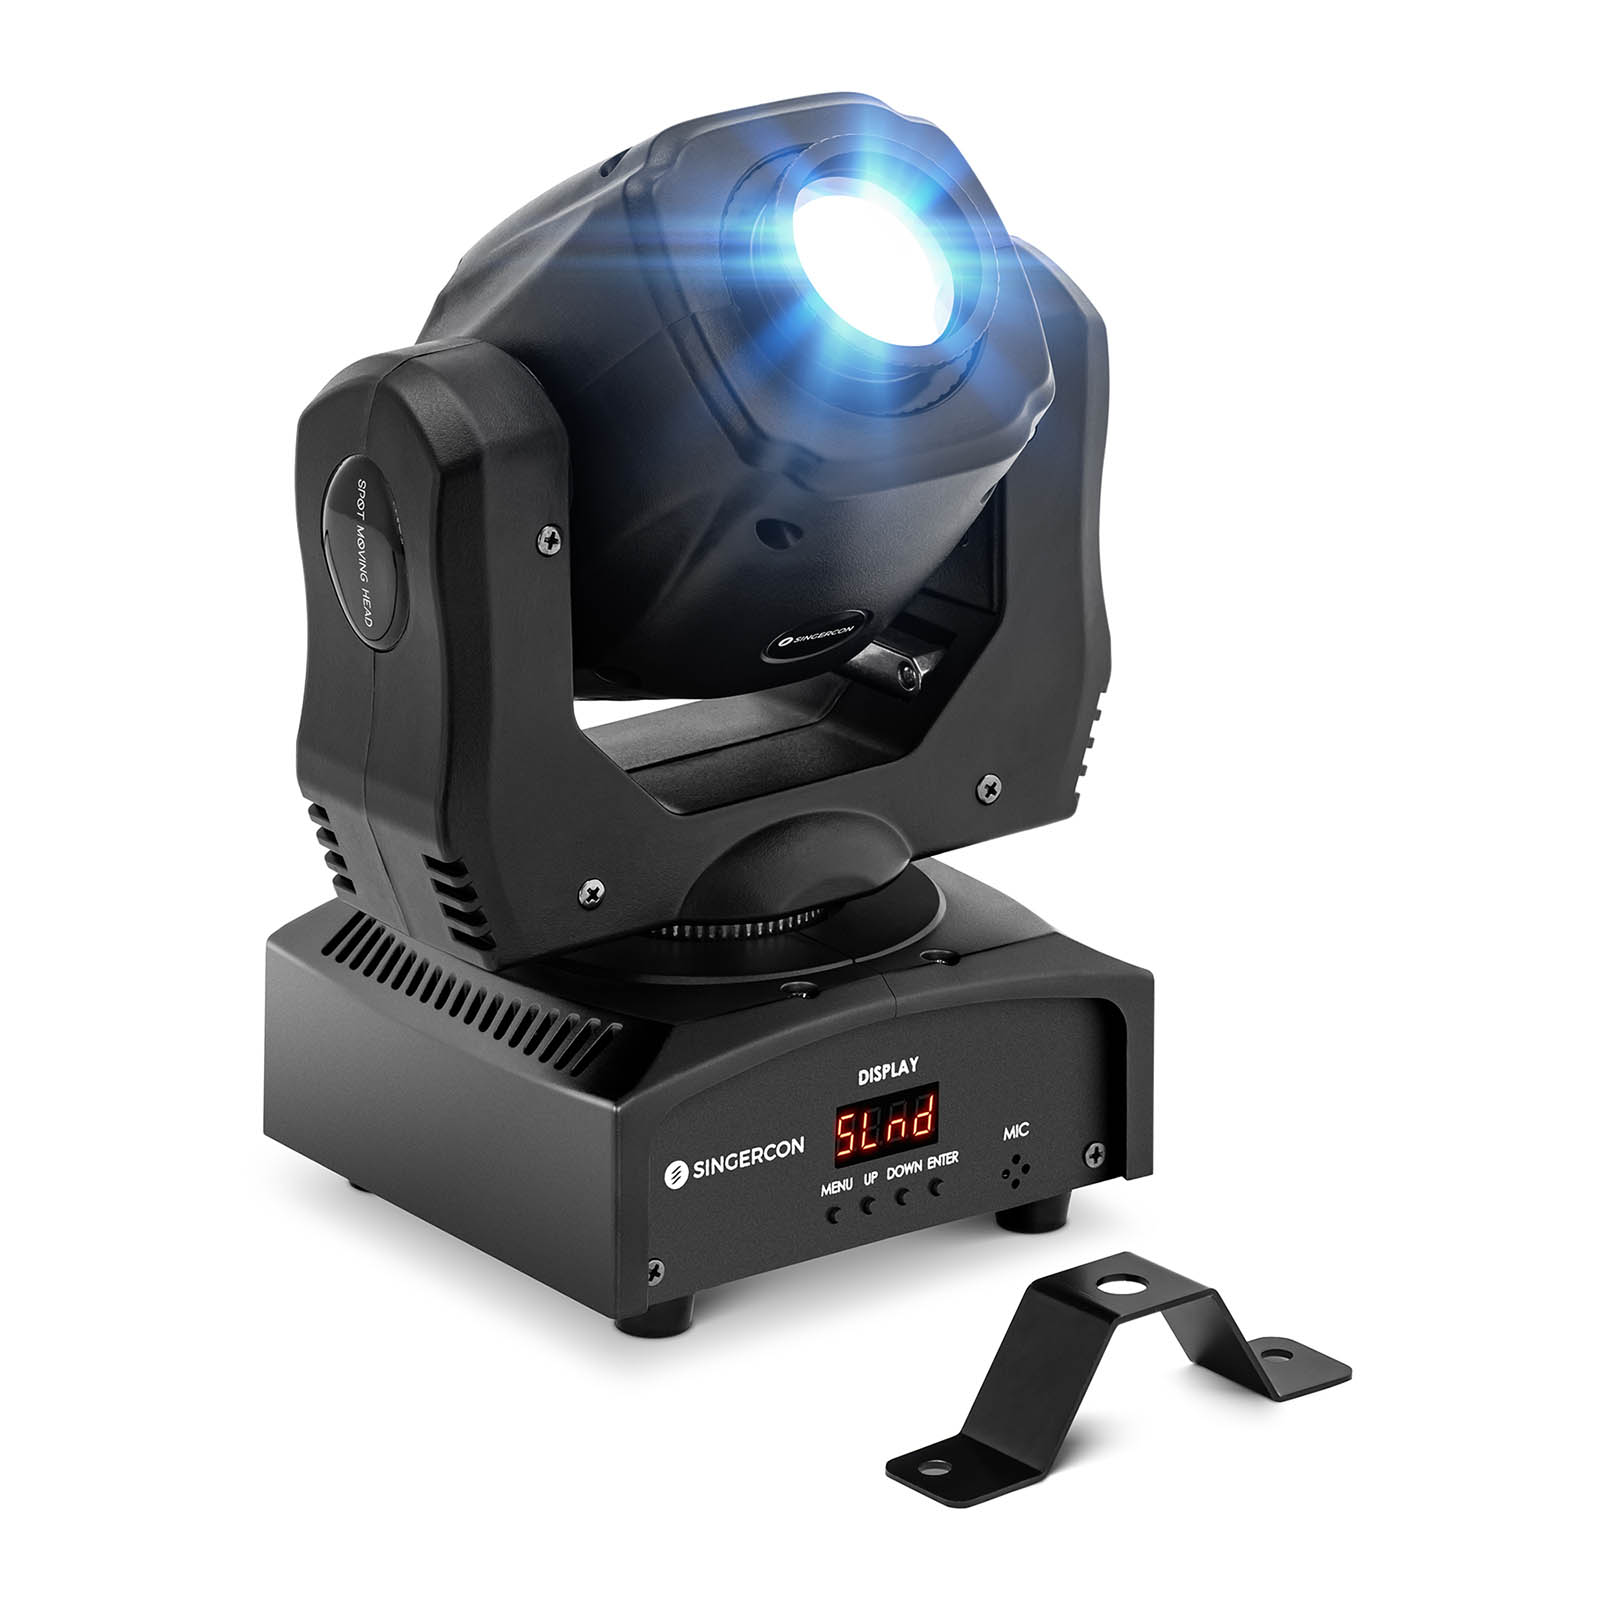 Moving Head Spot - 8 Muster - 60 W LED - 90 W - RGBW